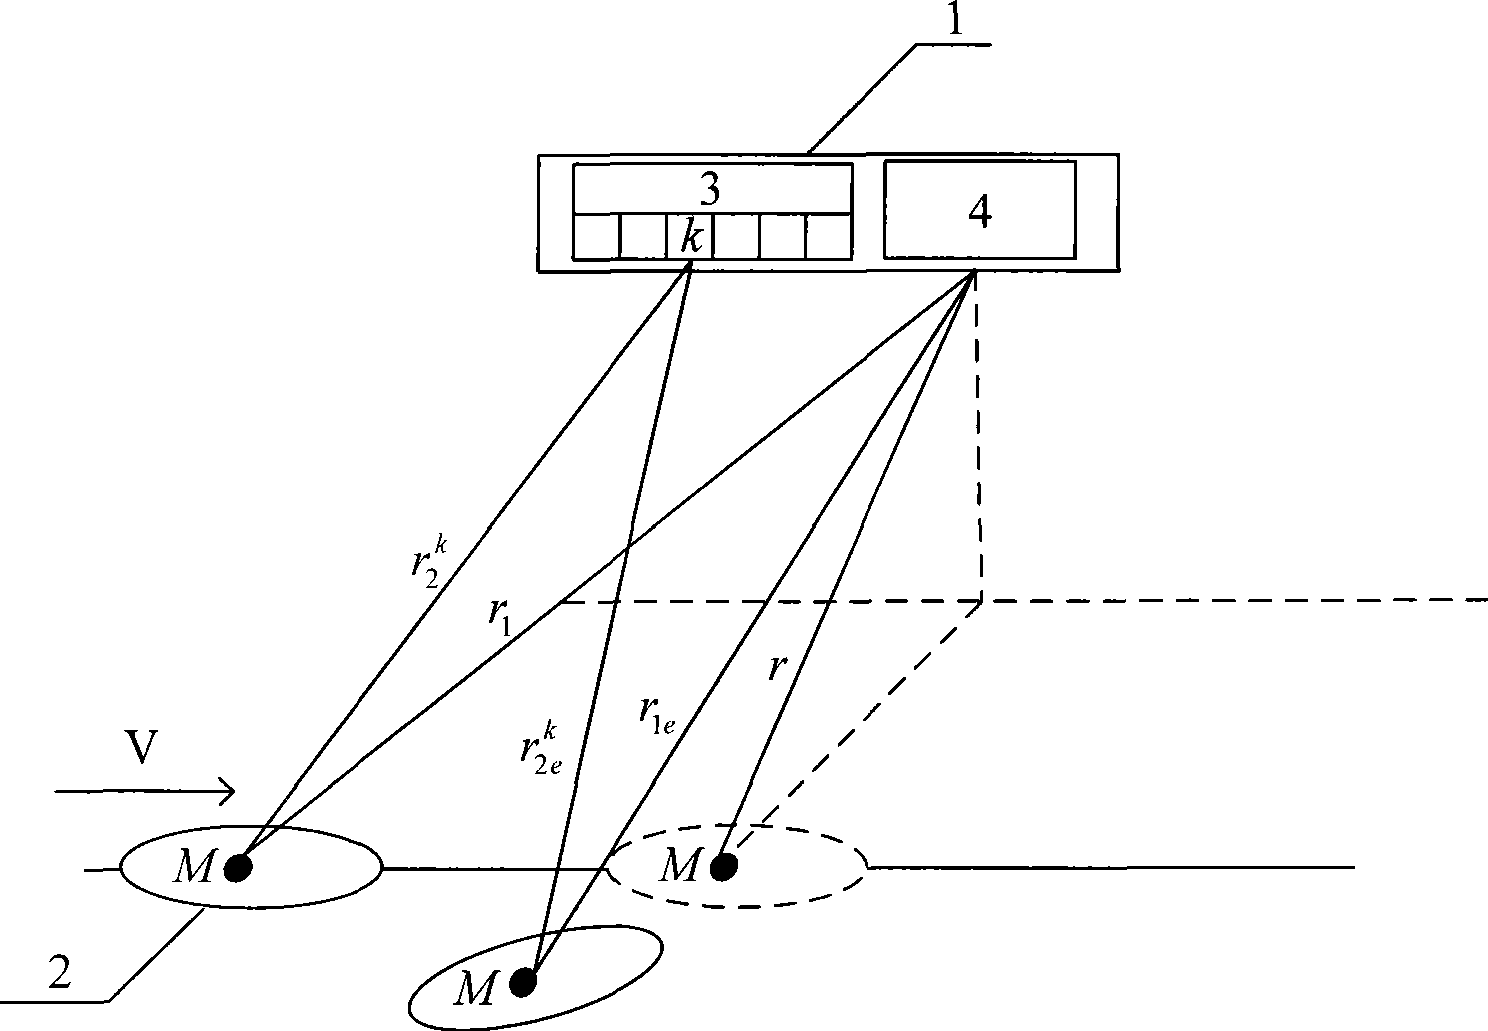 Two-dimension scattering property measuring method for underwater movement objective